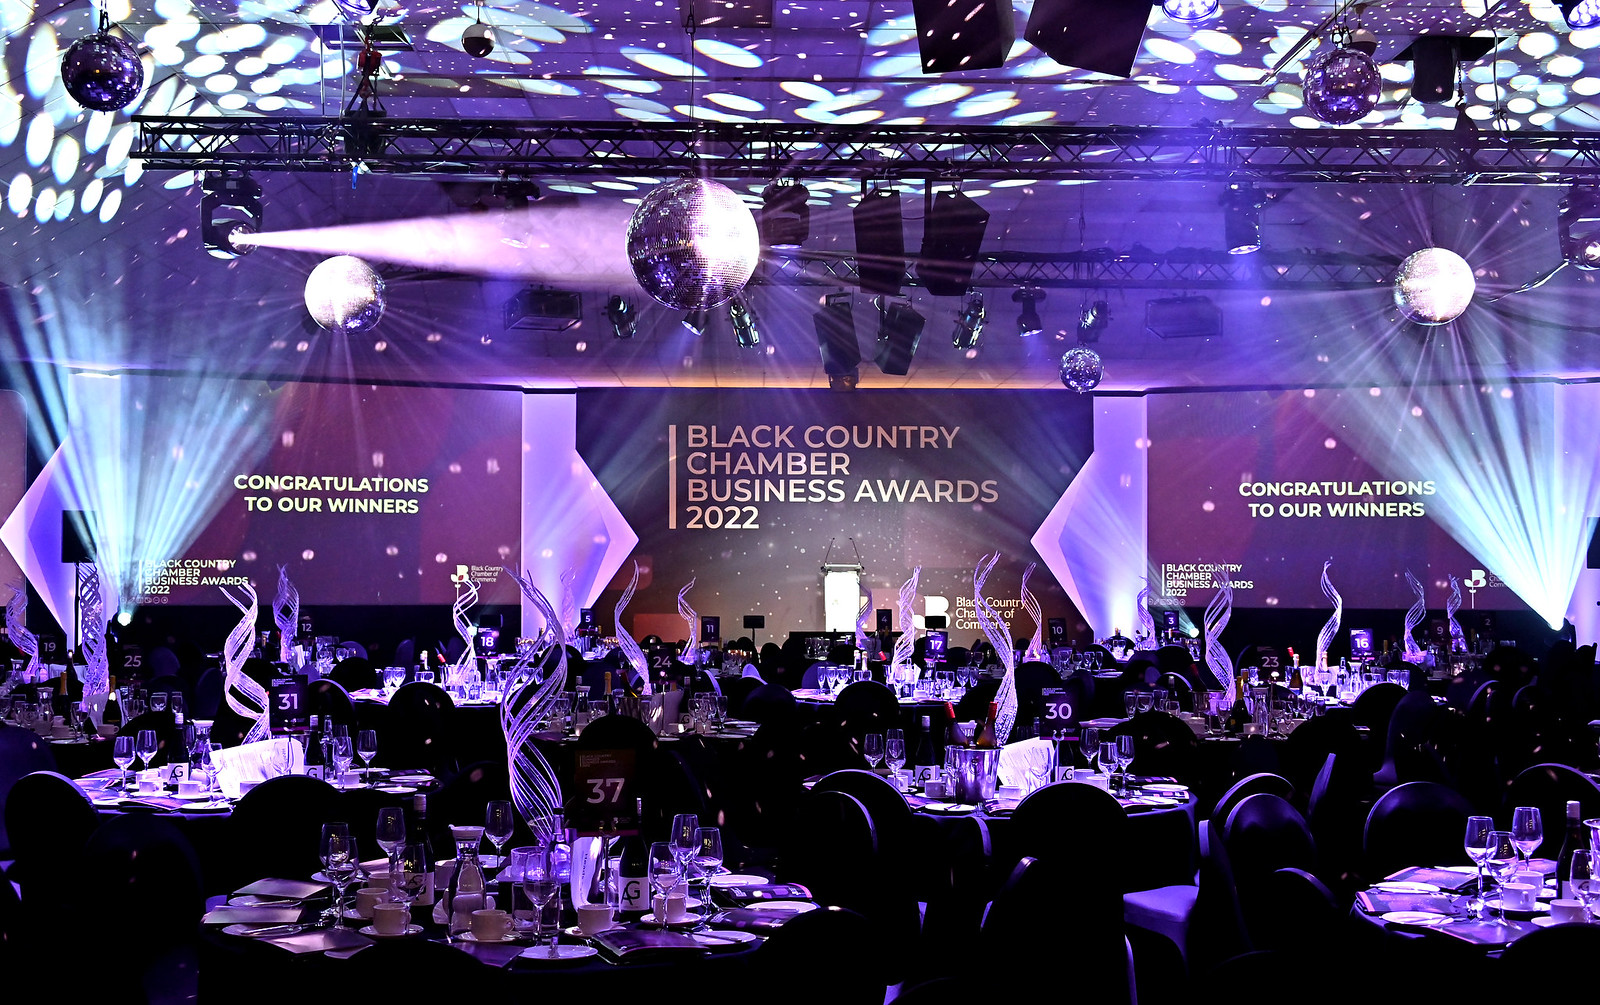 Black Country Chamber Business Awards 2022